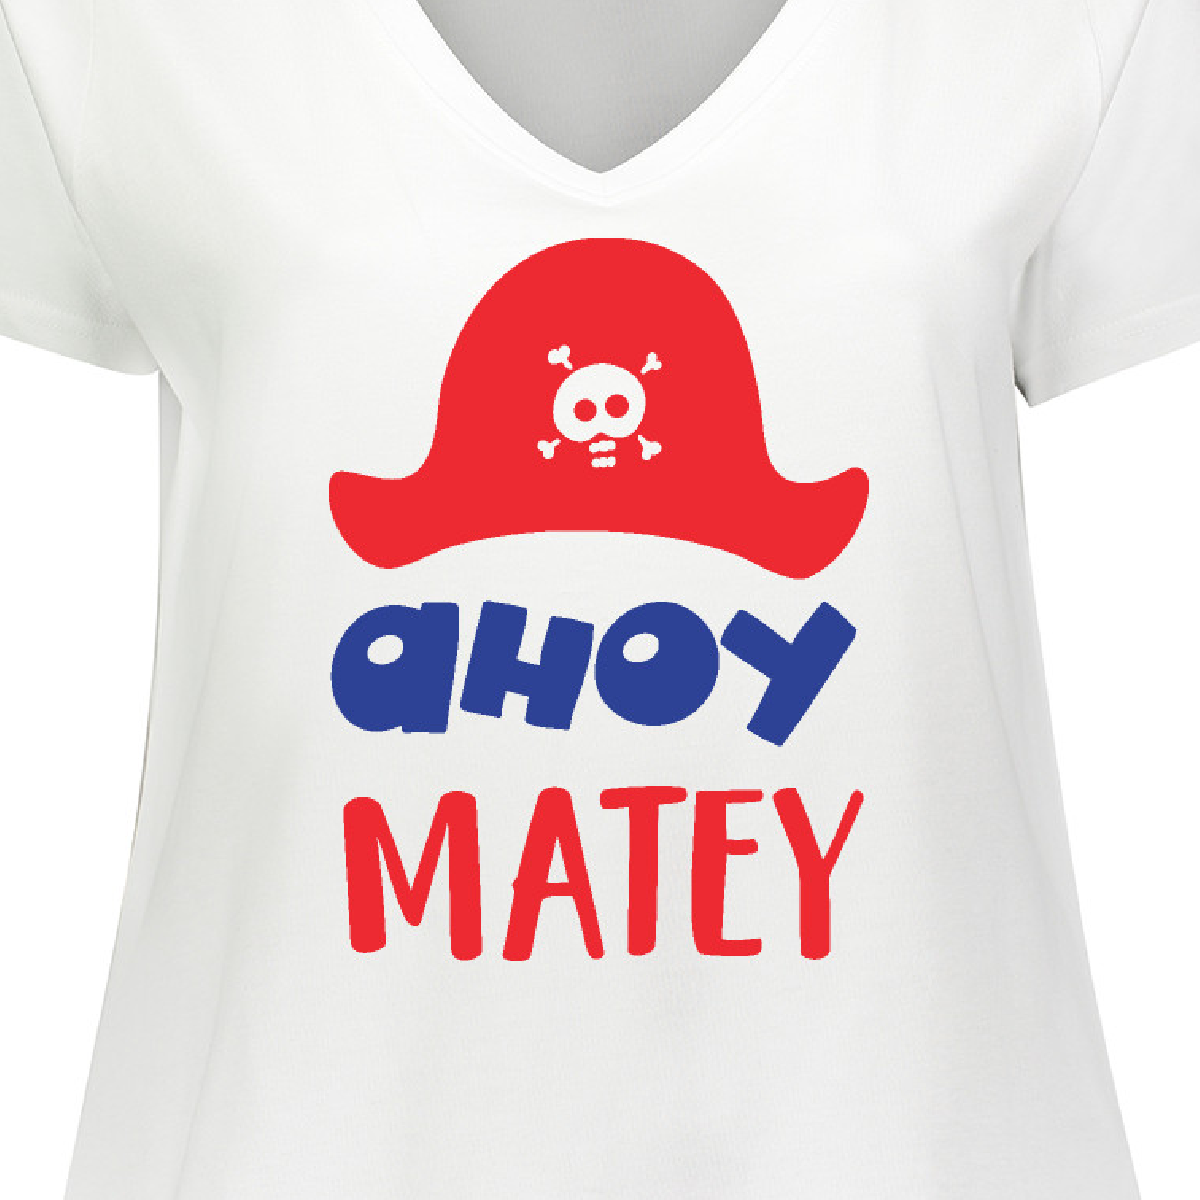 Inktastic Ahoy Matey, Pirate Hat, Skull and Bones, Pirates Women's Plus Size V-Neck T-Shirt - image 3 of 4